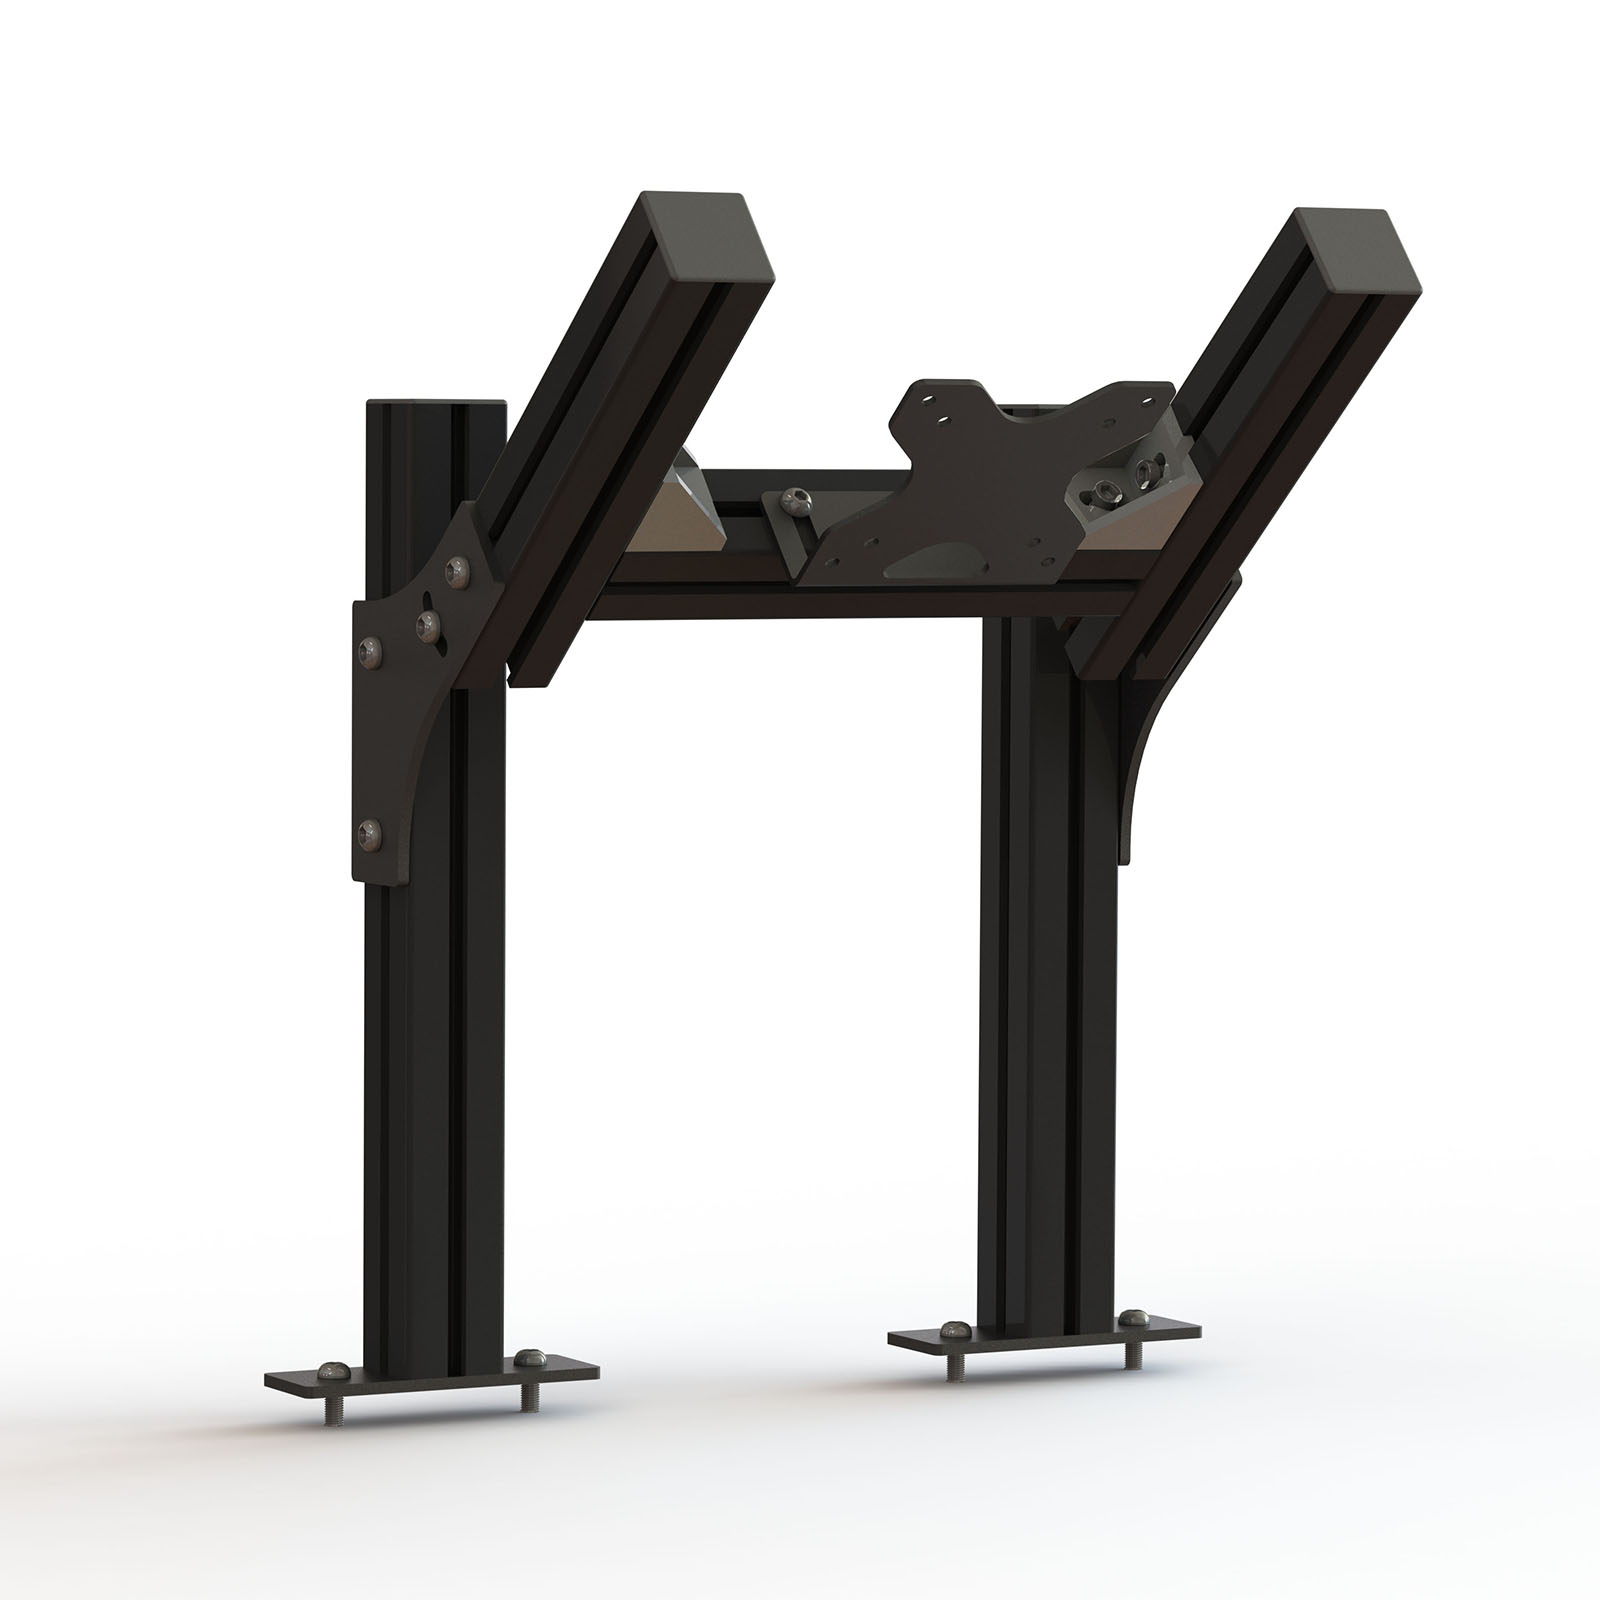 4TH MONITOR STAND – Cod. MS4-B